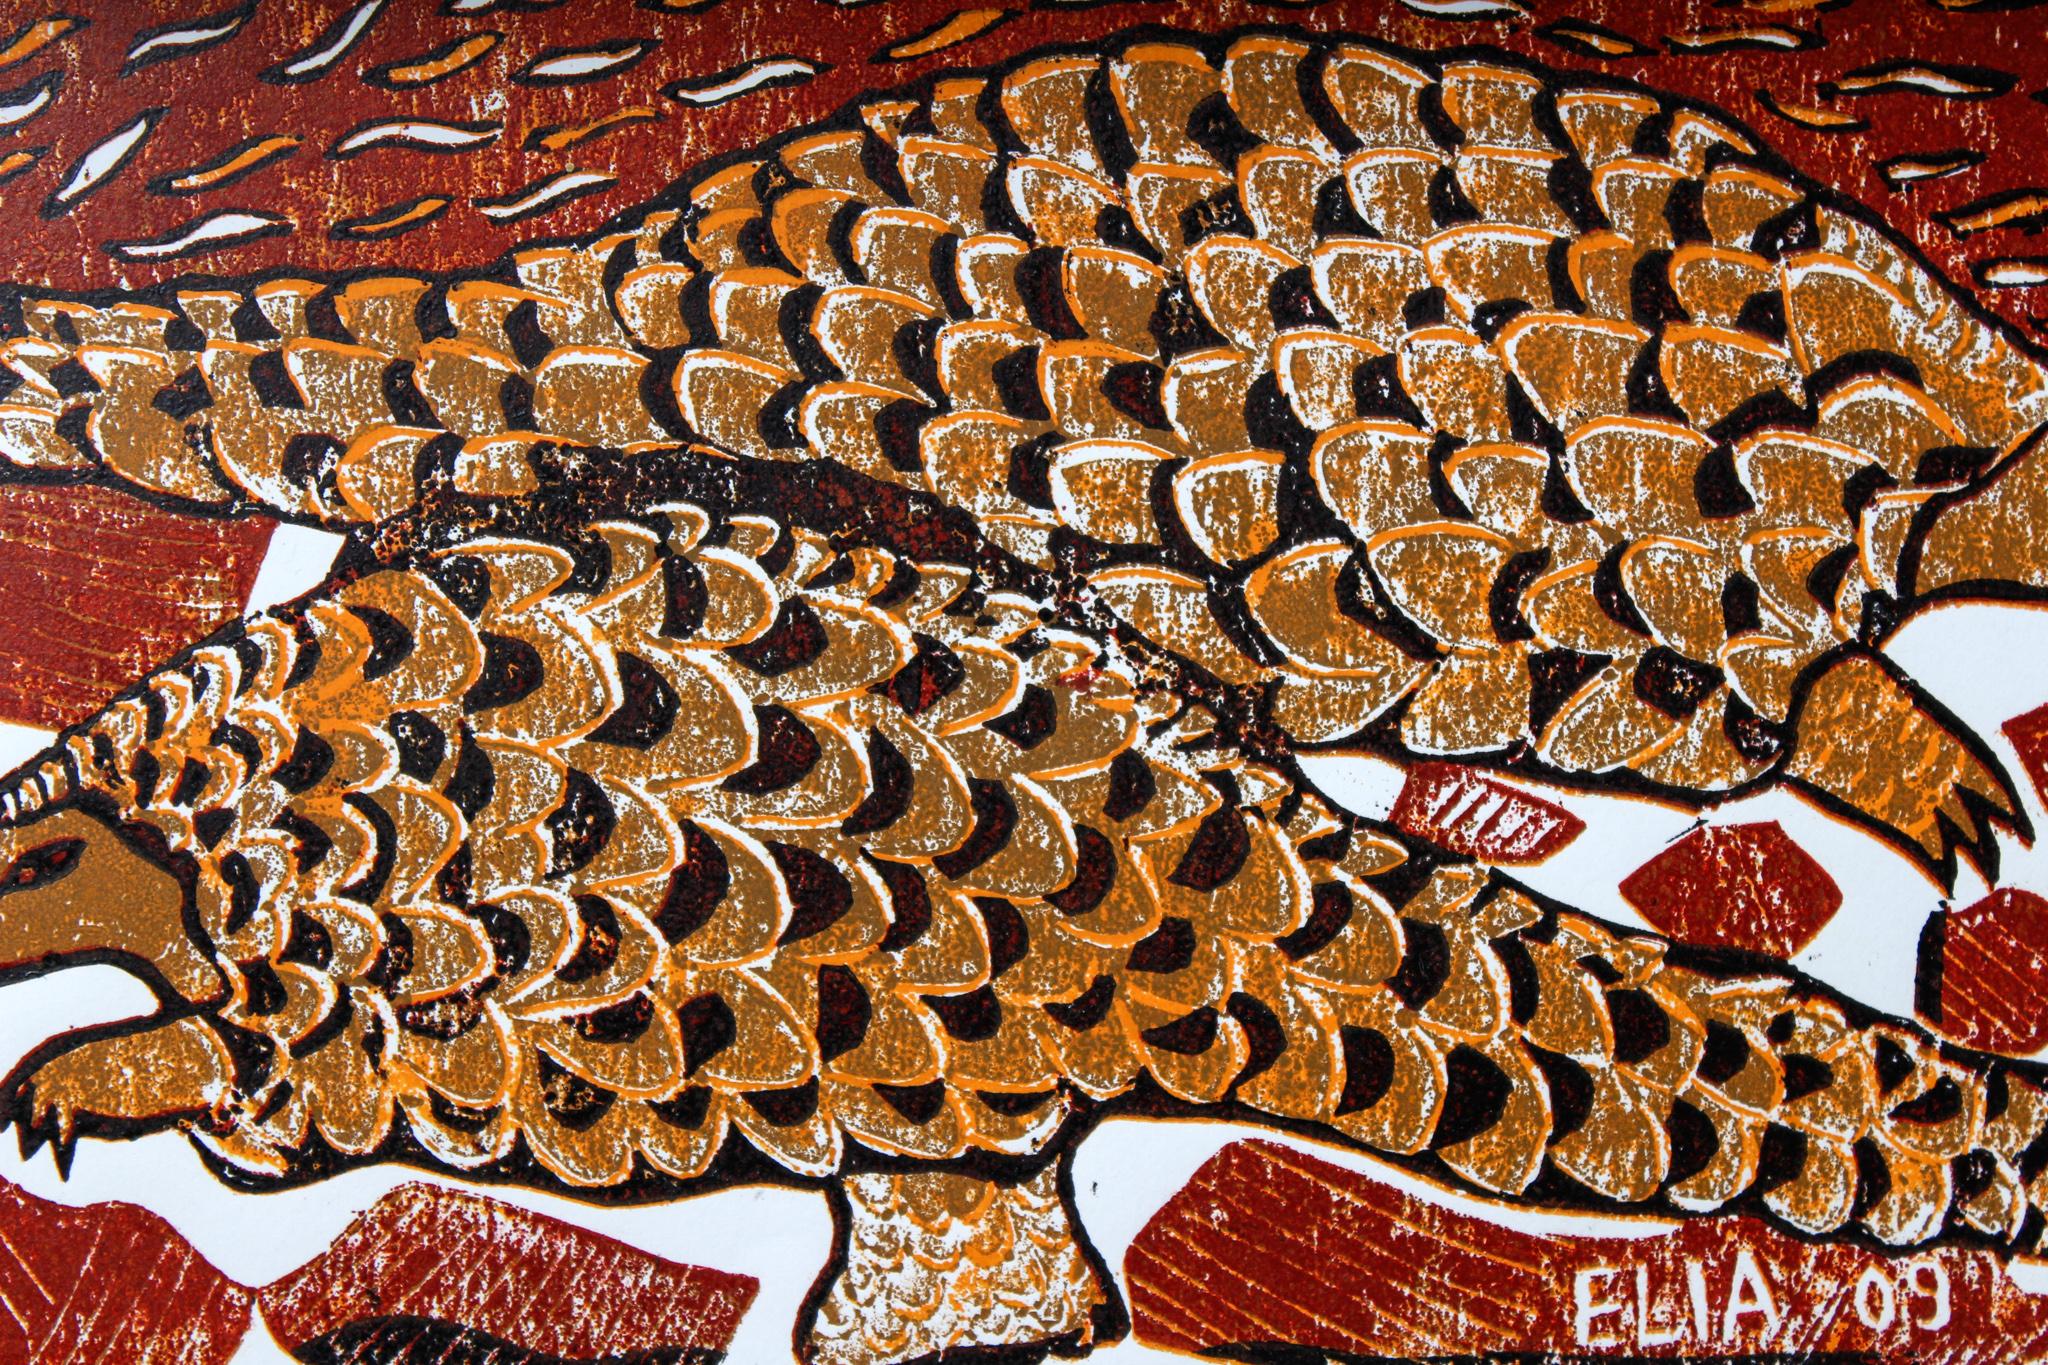 The pangolins, 2090. Cardboard block print on paper.  Edition of 11.

Elia Shiwoohamba was born in 1981 in Windhoek, Namibia. He graduated from the John Muafangejo Art Centre in Windhoek in 2006. Specialising in printmaking and sculpture,